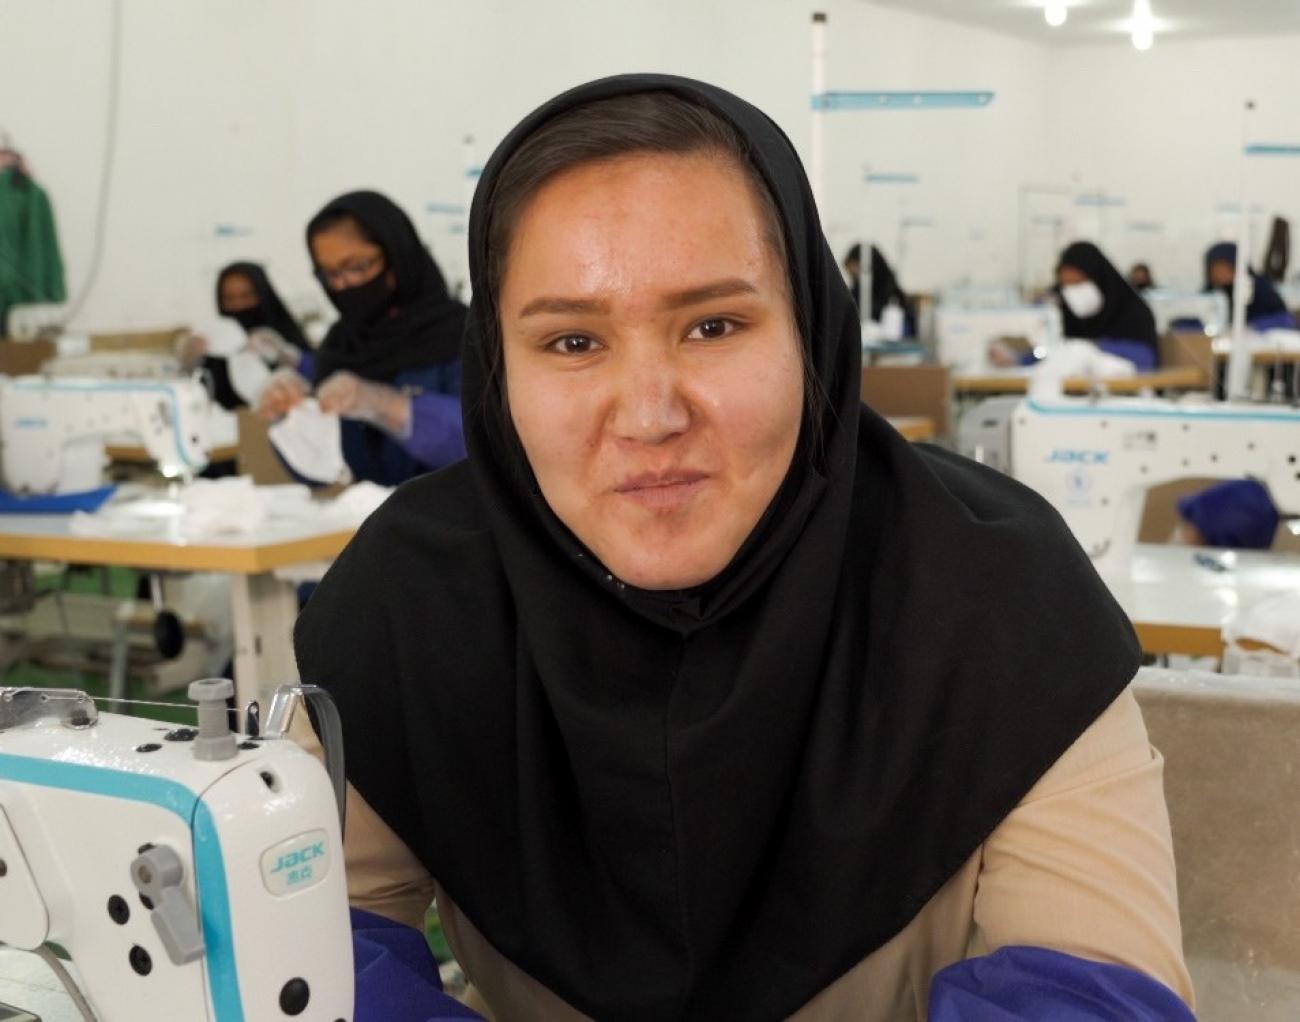 A young woman looks directly at the camera in a room full of women working at sewing machines. 